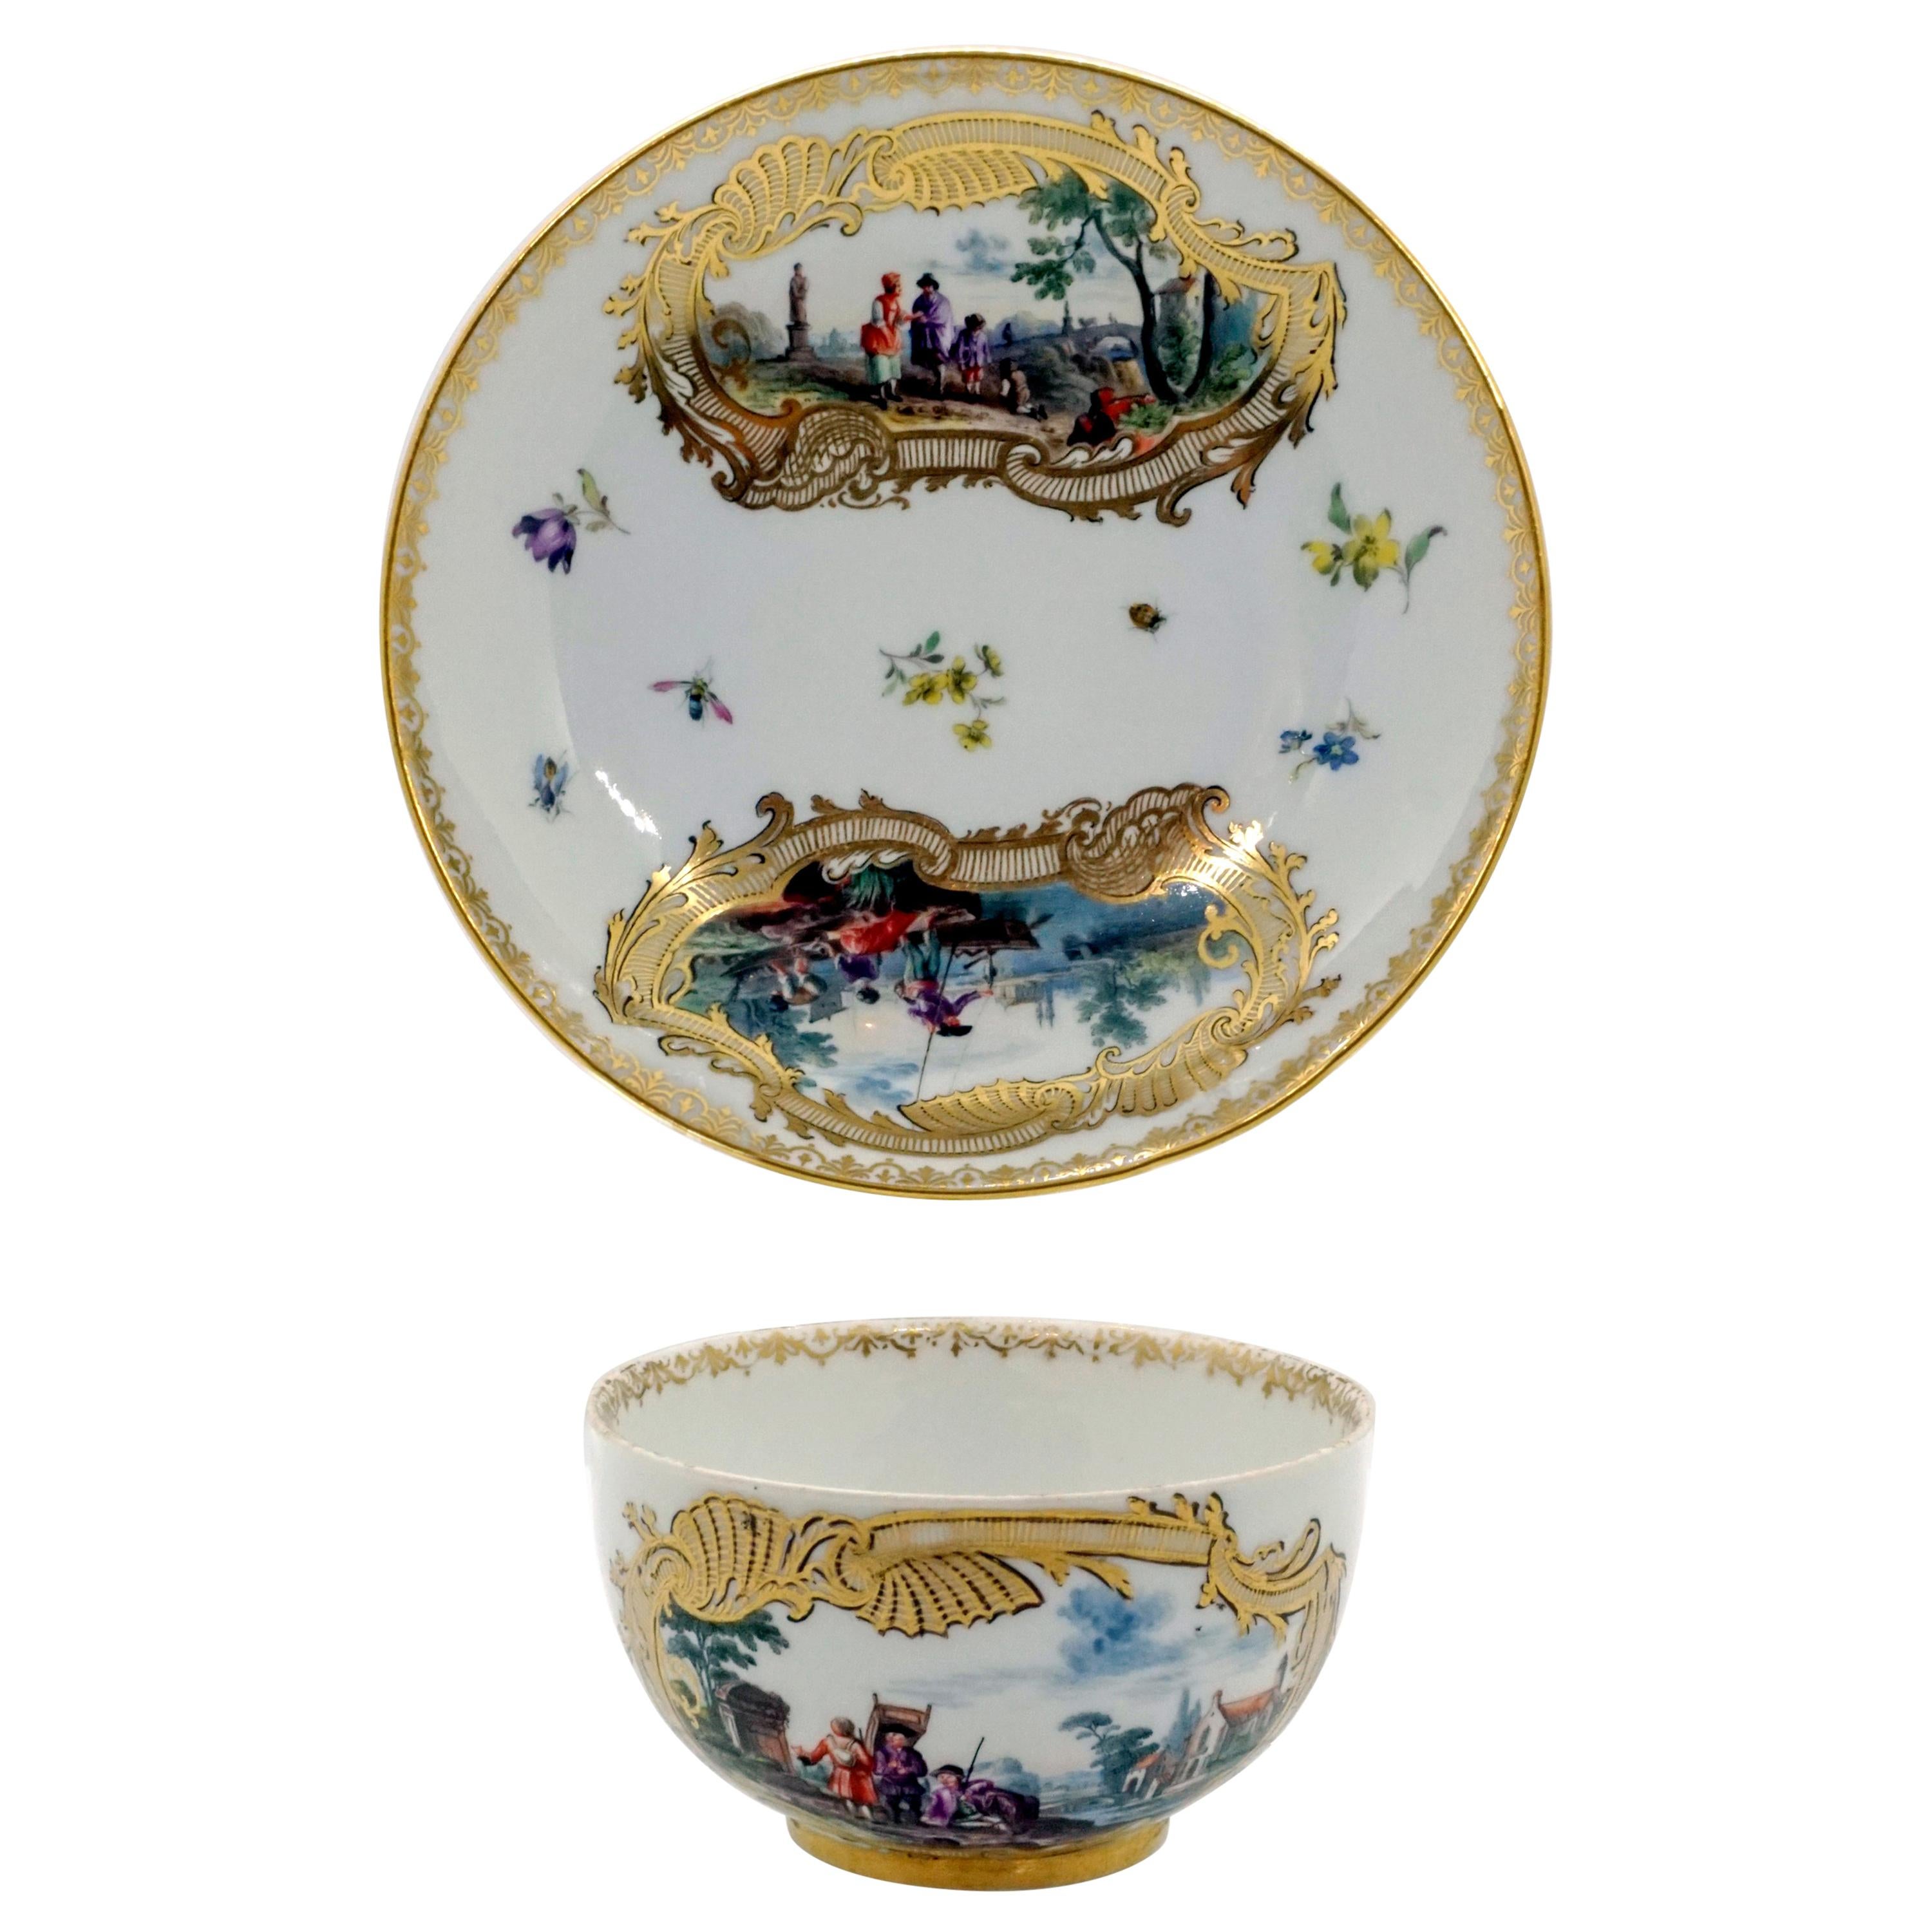 Eary 19th Century Meissen Cup and Saucer with Kauffahrtei Scenes and Gold Decor